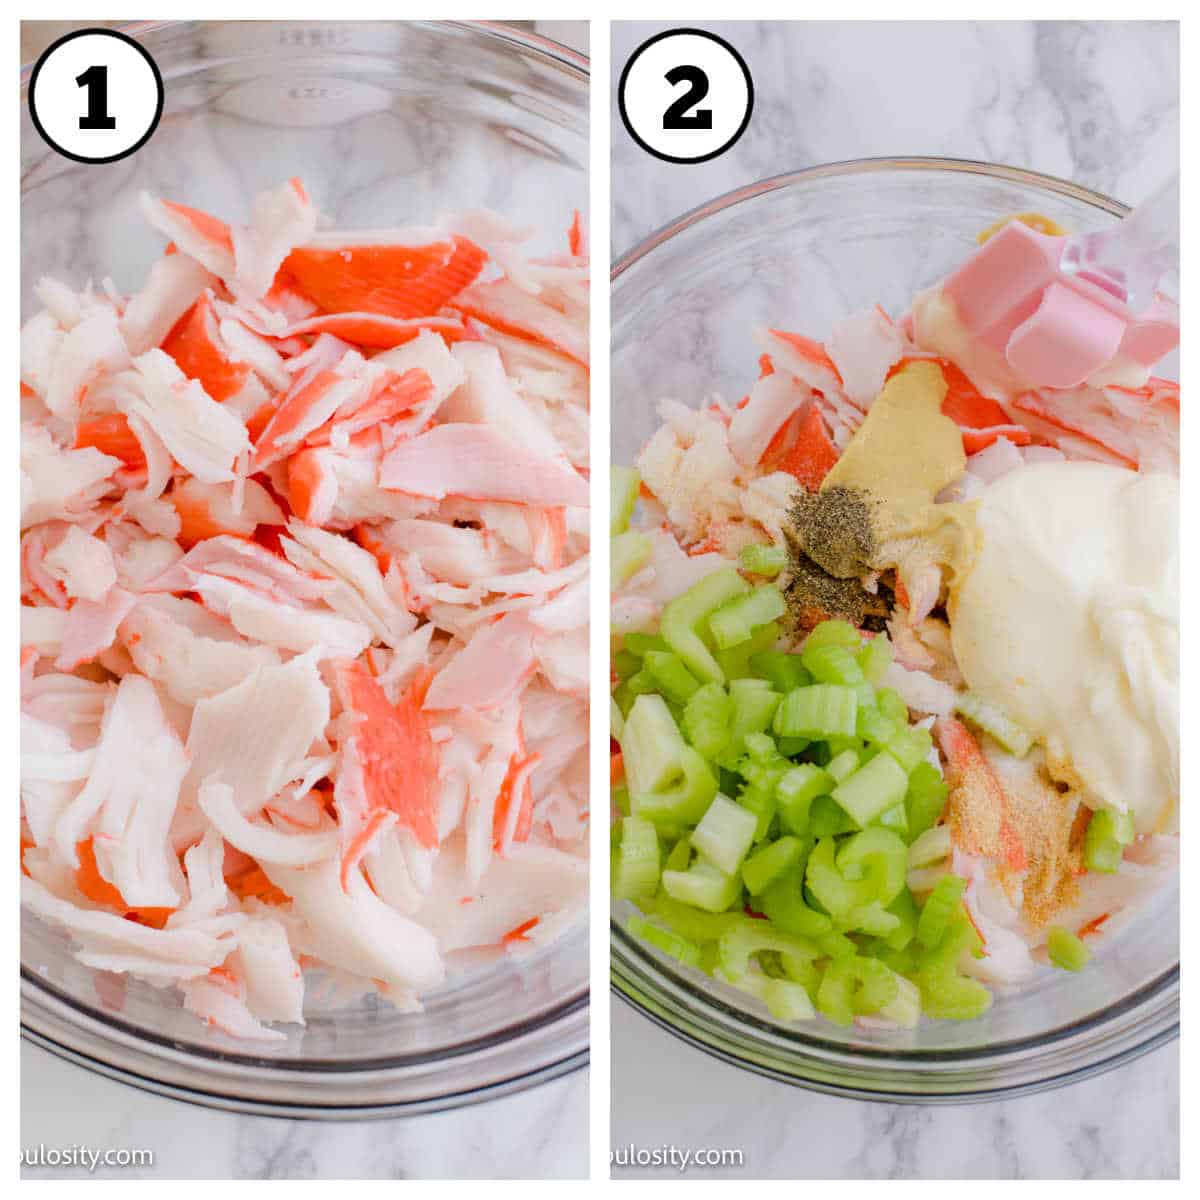 Steps 1 and 2 for making crab salad.